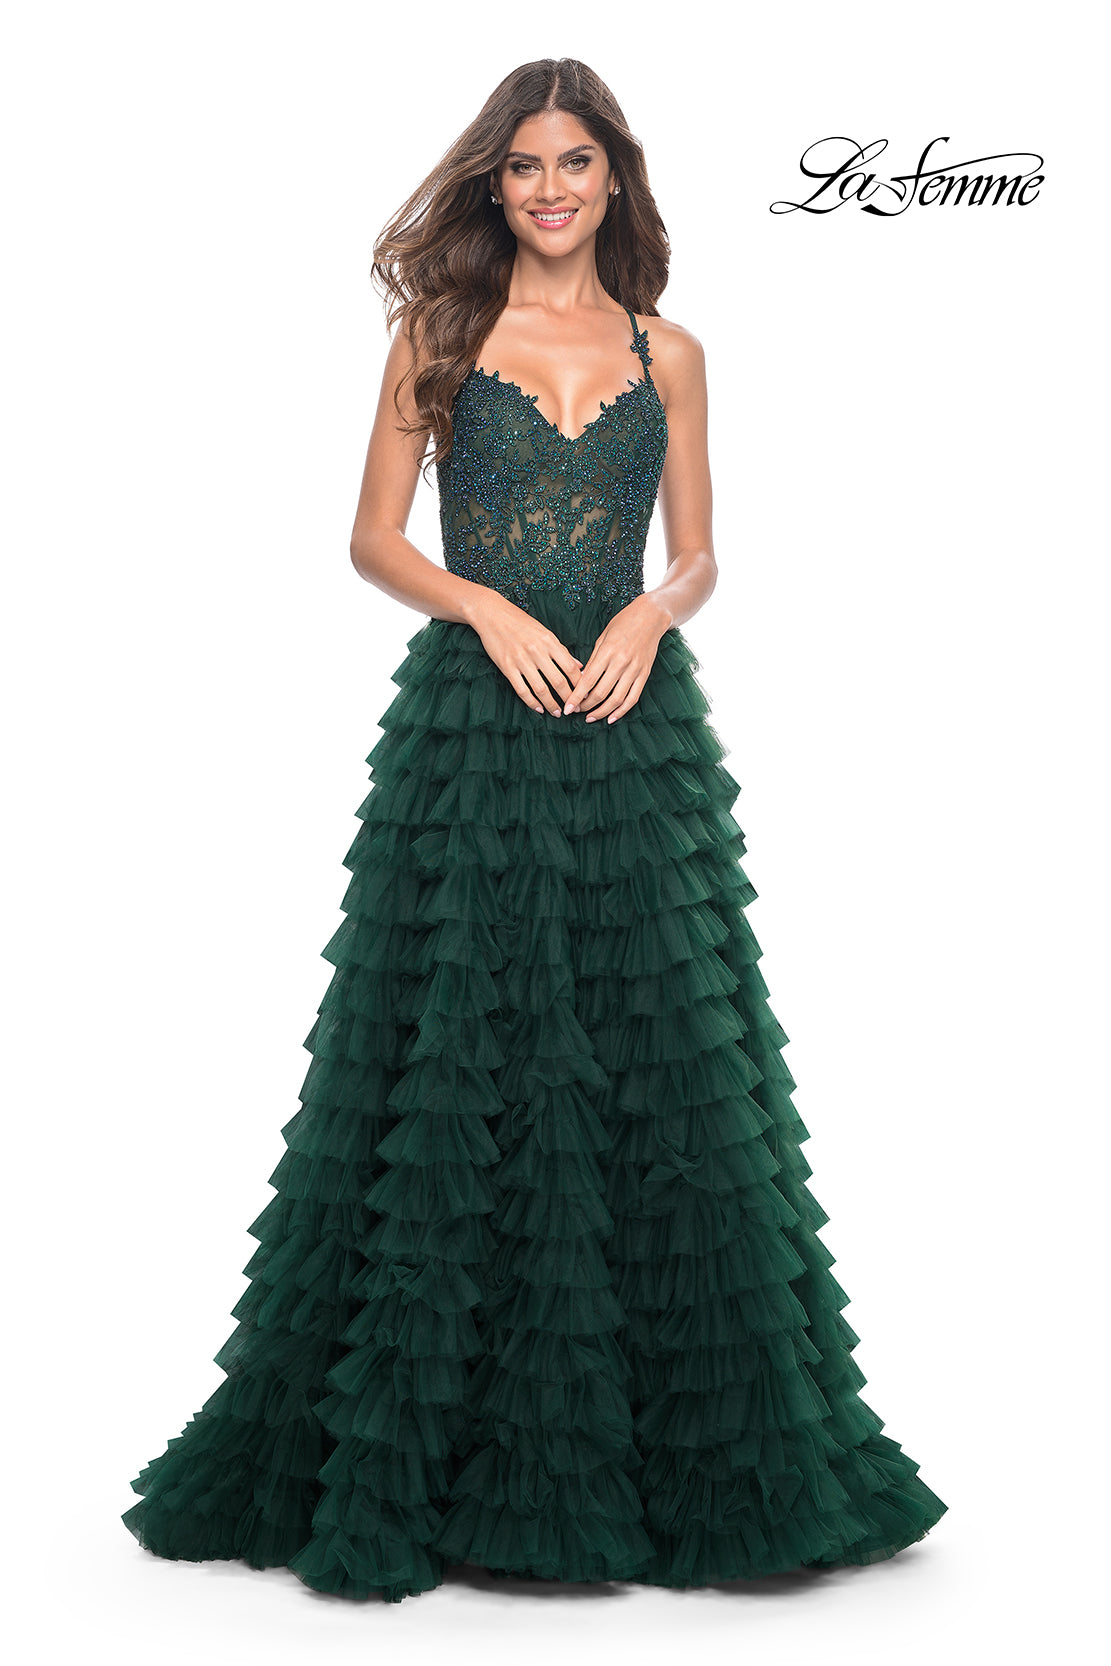 La-Femme-32128-Sweetheart-Neckline-Lace-up-Back-High-Slit-Lace-Tulle-Ball-Gowns-Dark-Emerald-Evening-Dress-B-Chic-Fashions-Prom-Dress